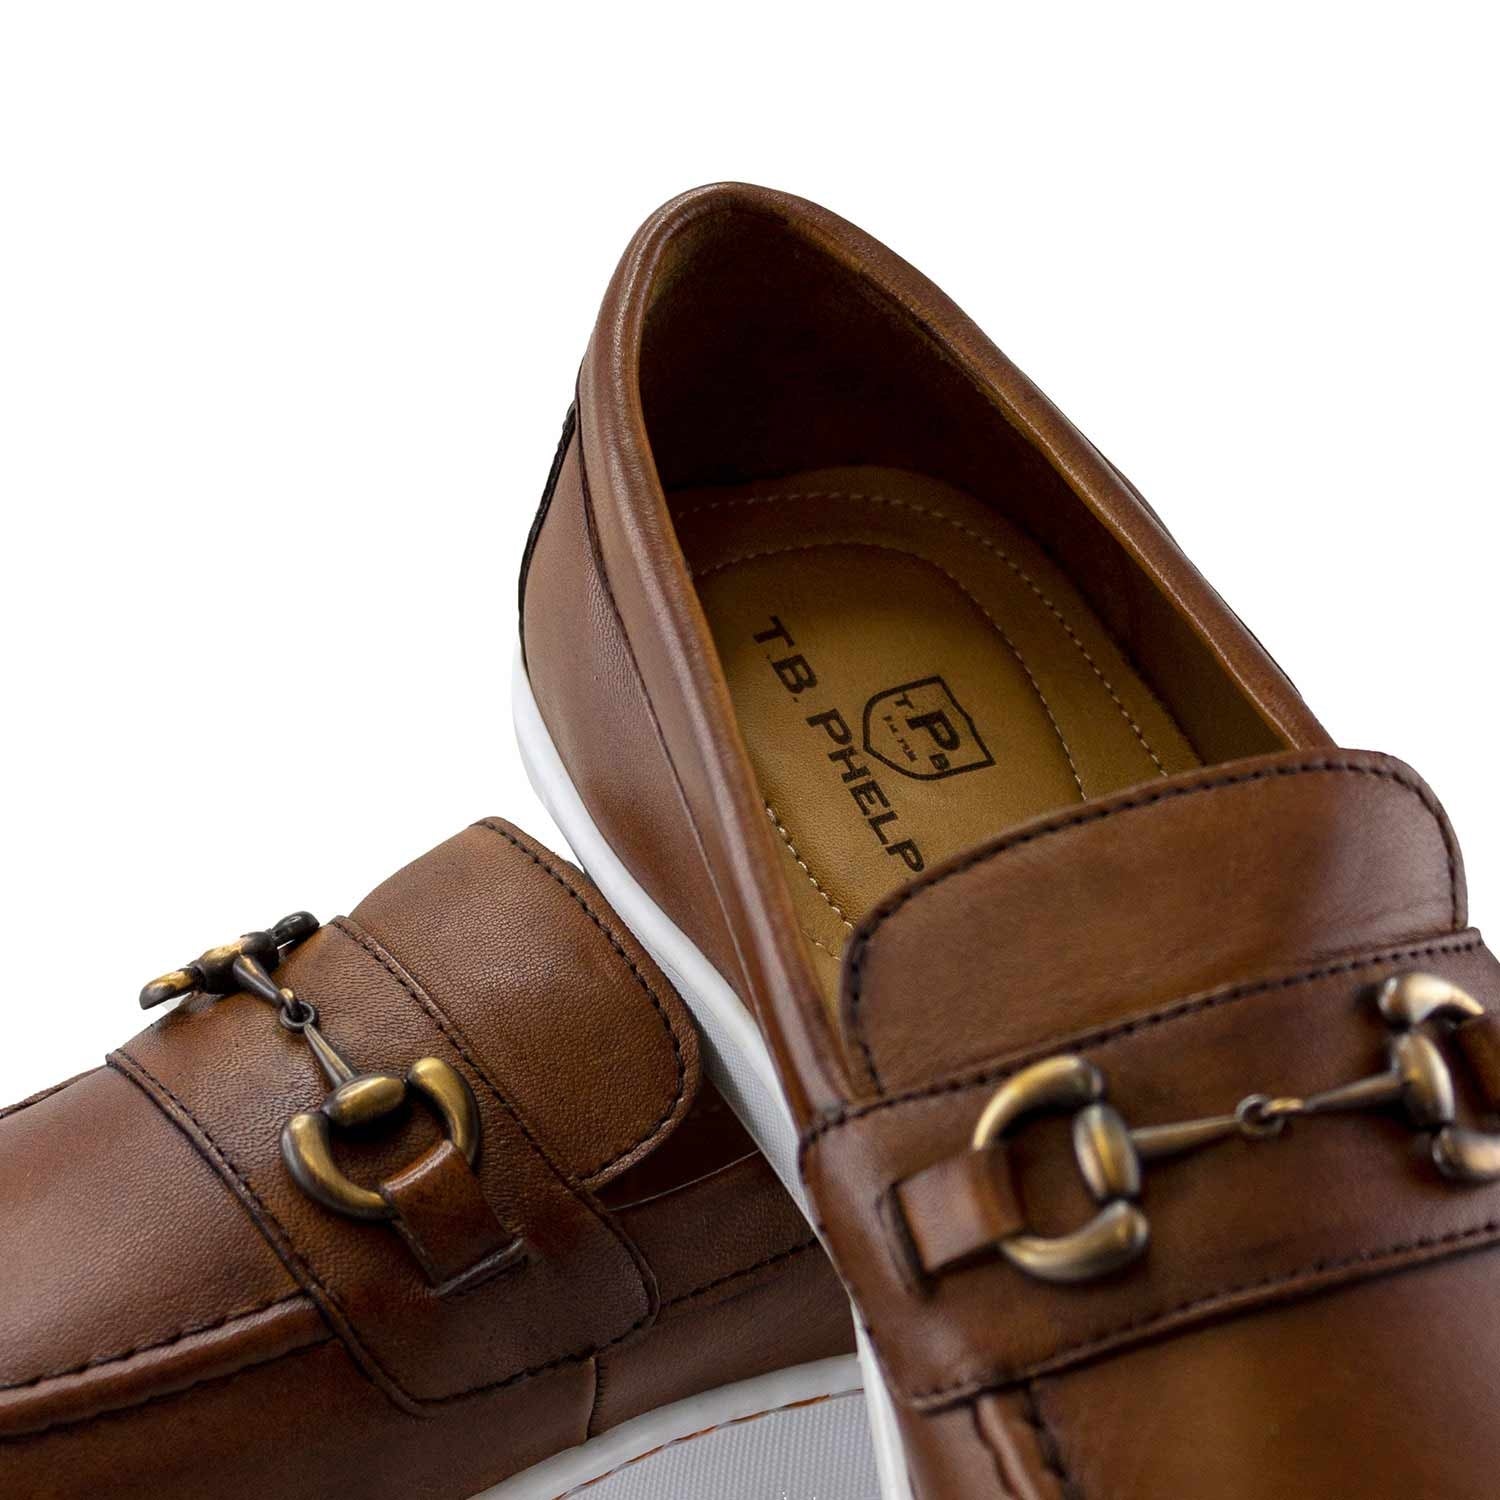 Clubhouse Bit Leather Golf Slip-On Sneaker in Pecan by T.B. Phelps